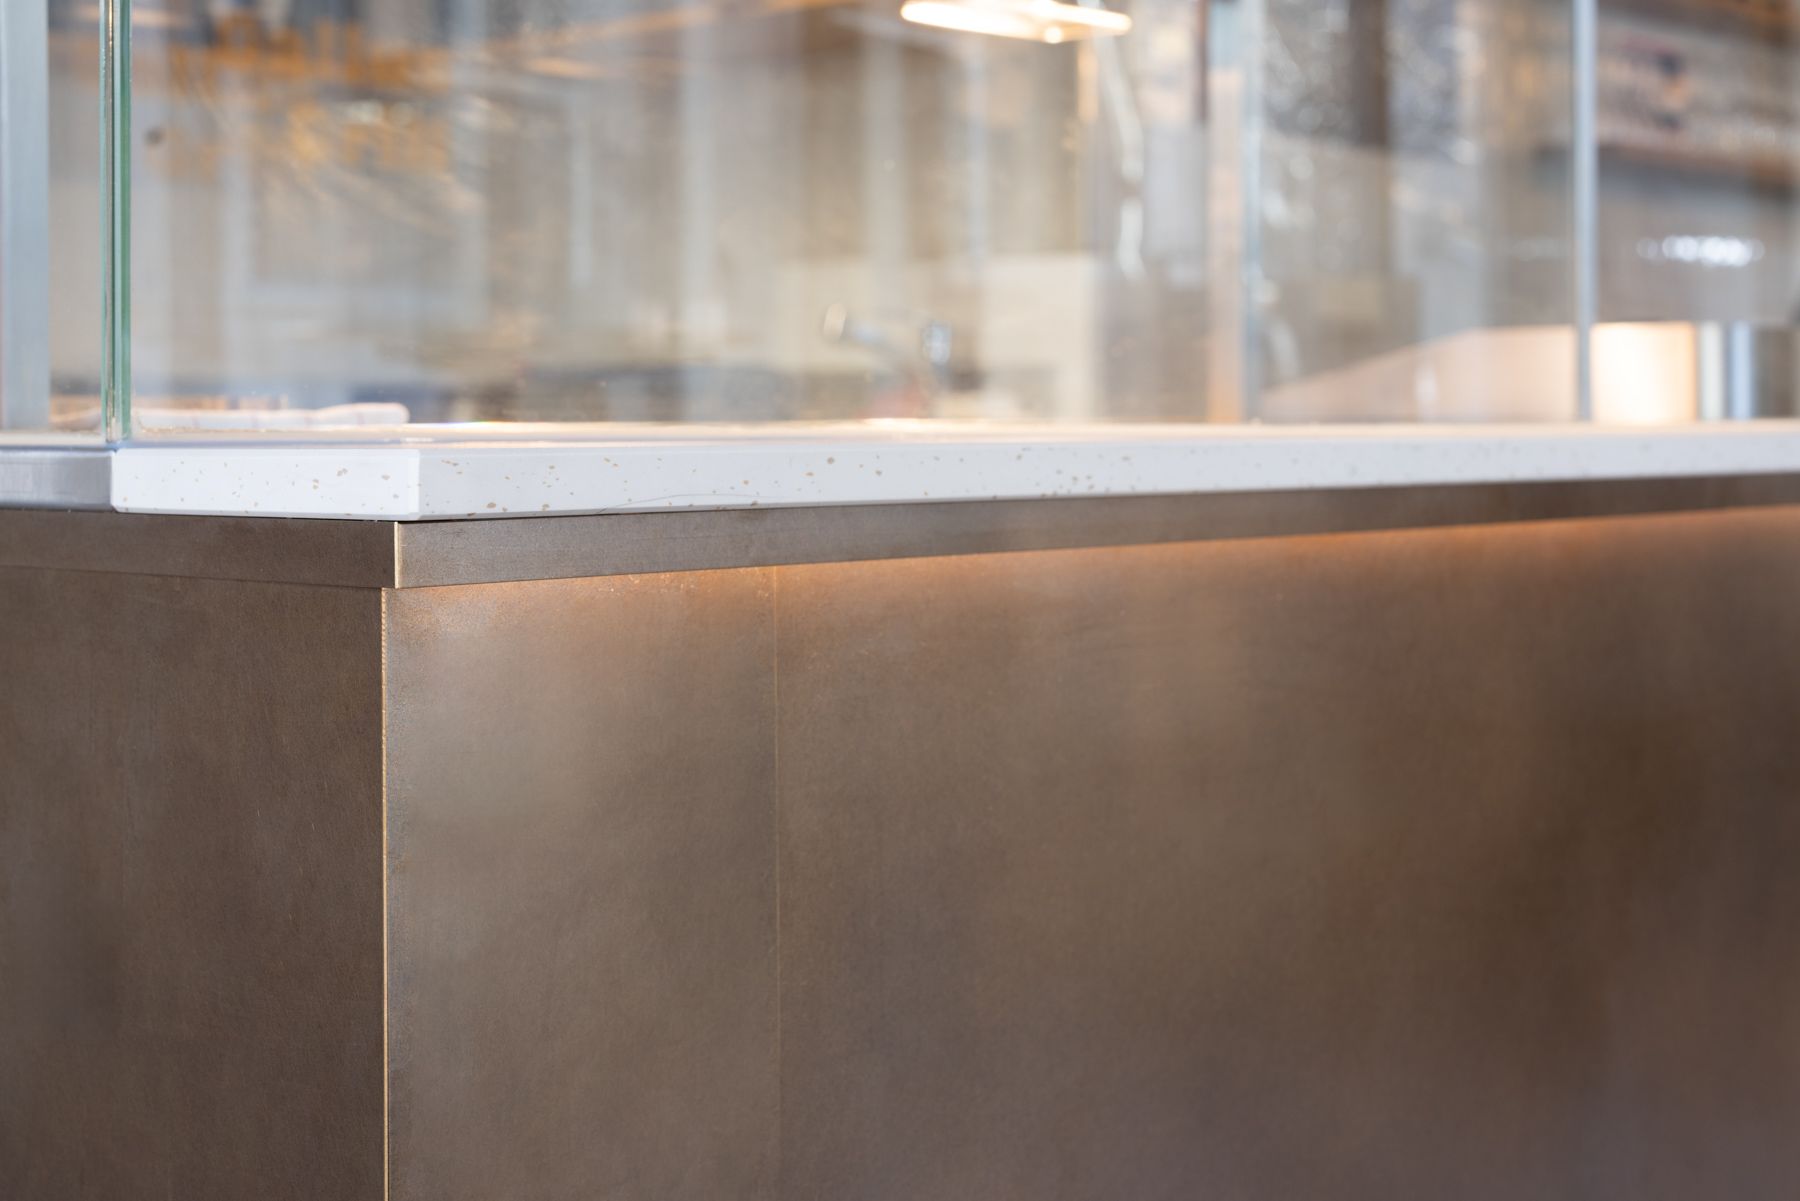 The focal point is a grand central grill clad in bronzed brass setting the stage for the down to earth eatery